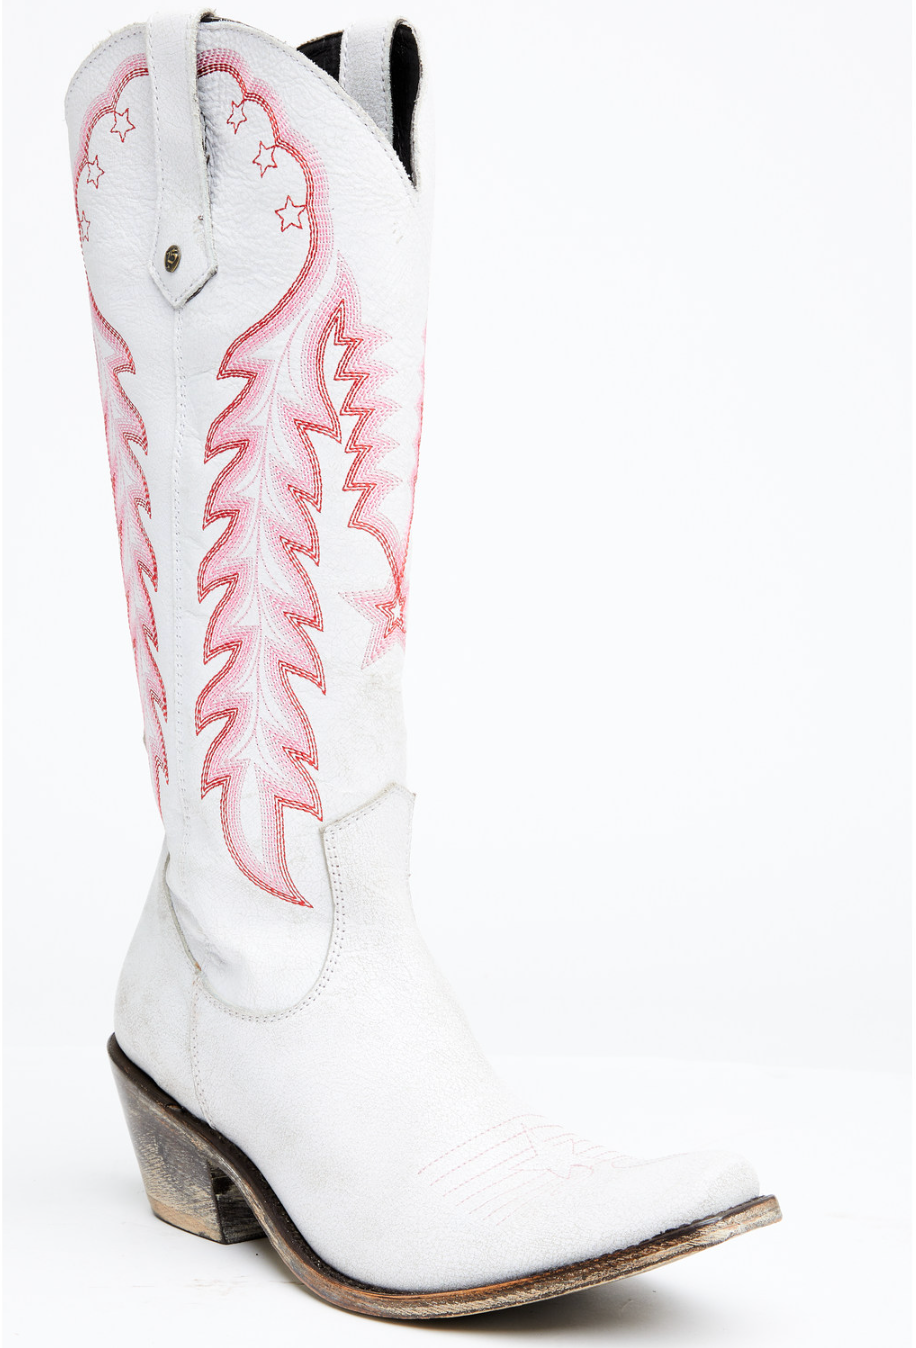 White cowboy boot with pink stars and embroidery